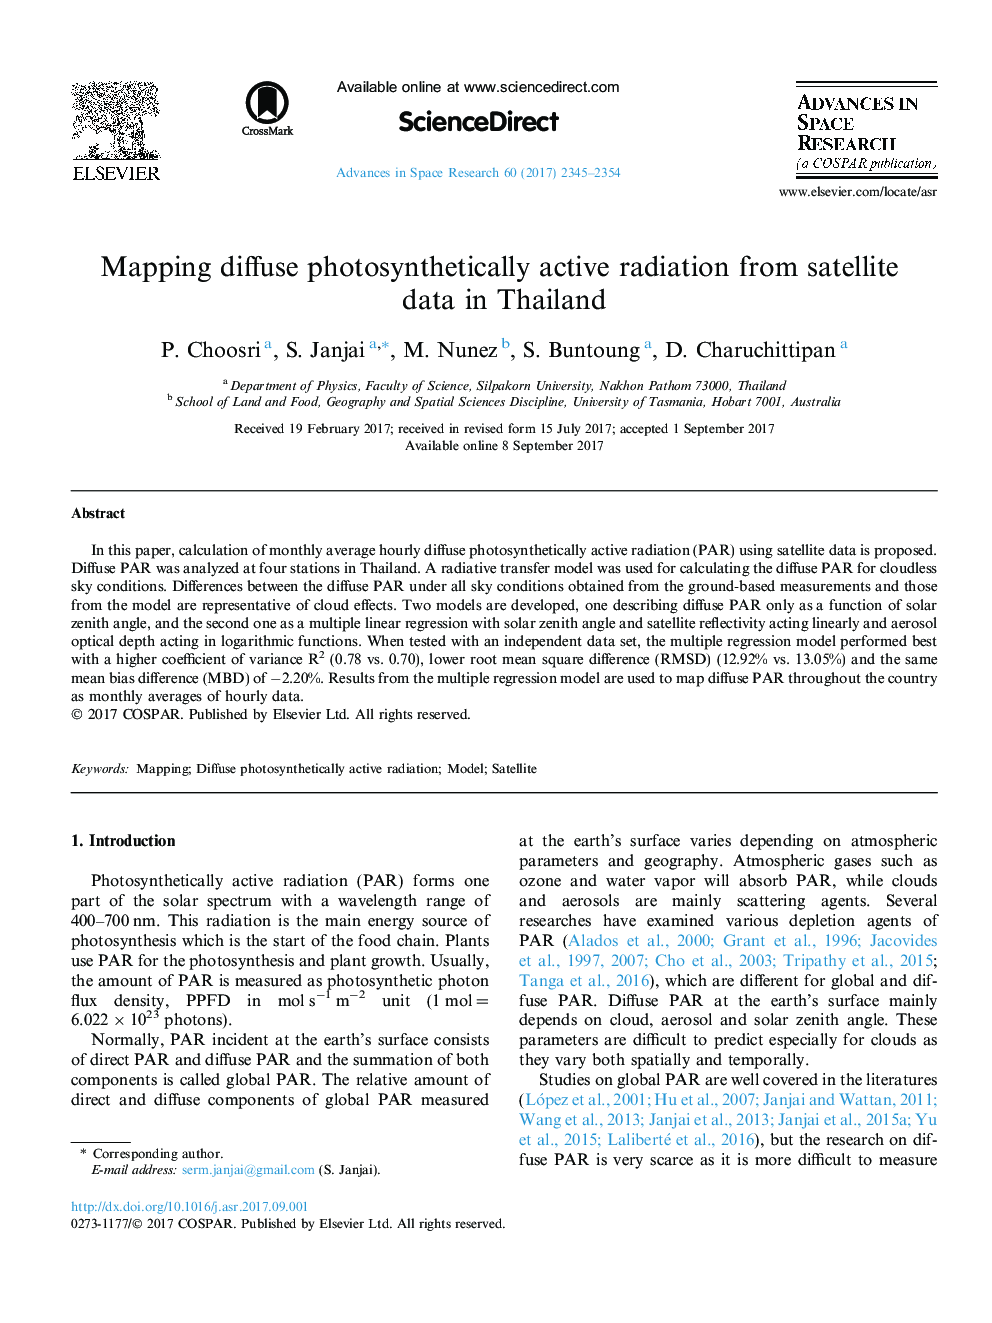 Mapping diffuse photosynthetically active radiation from satellite data in Thailand